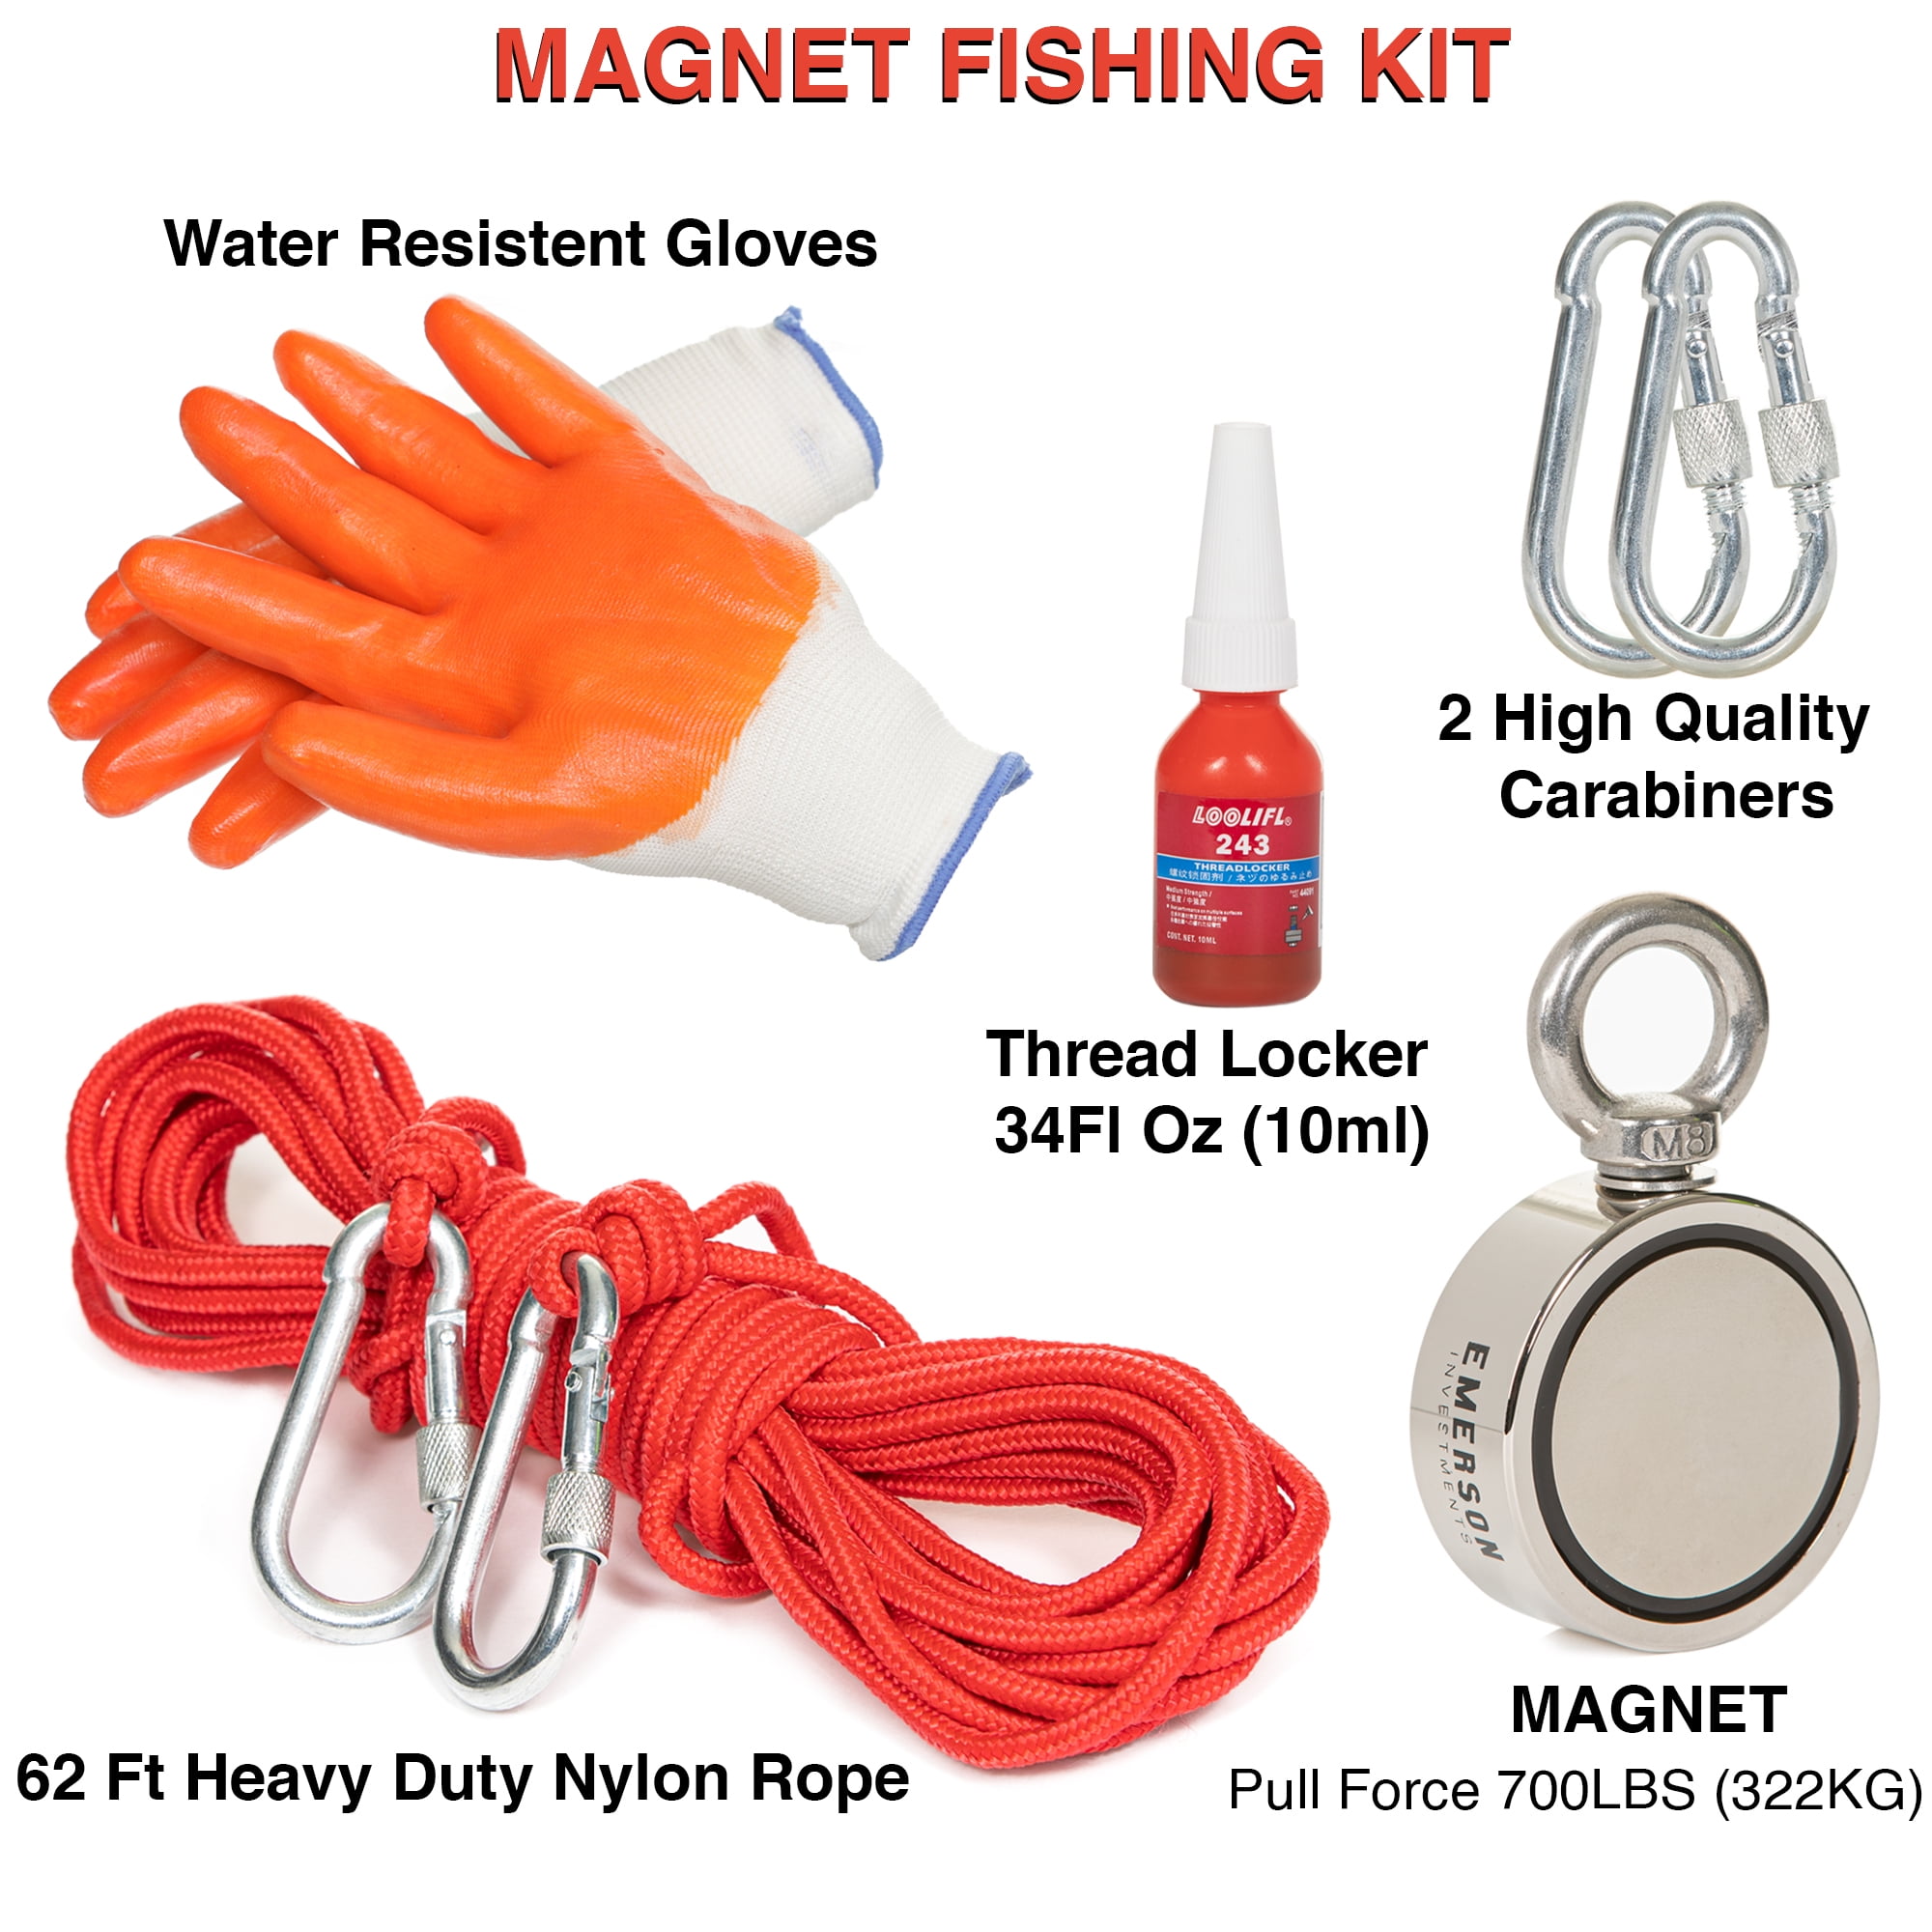 New 500/700lbs Fishing Magnet Kit Strong Neodymium Pull Force+10m Carabiner Rope 